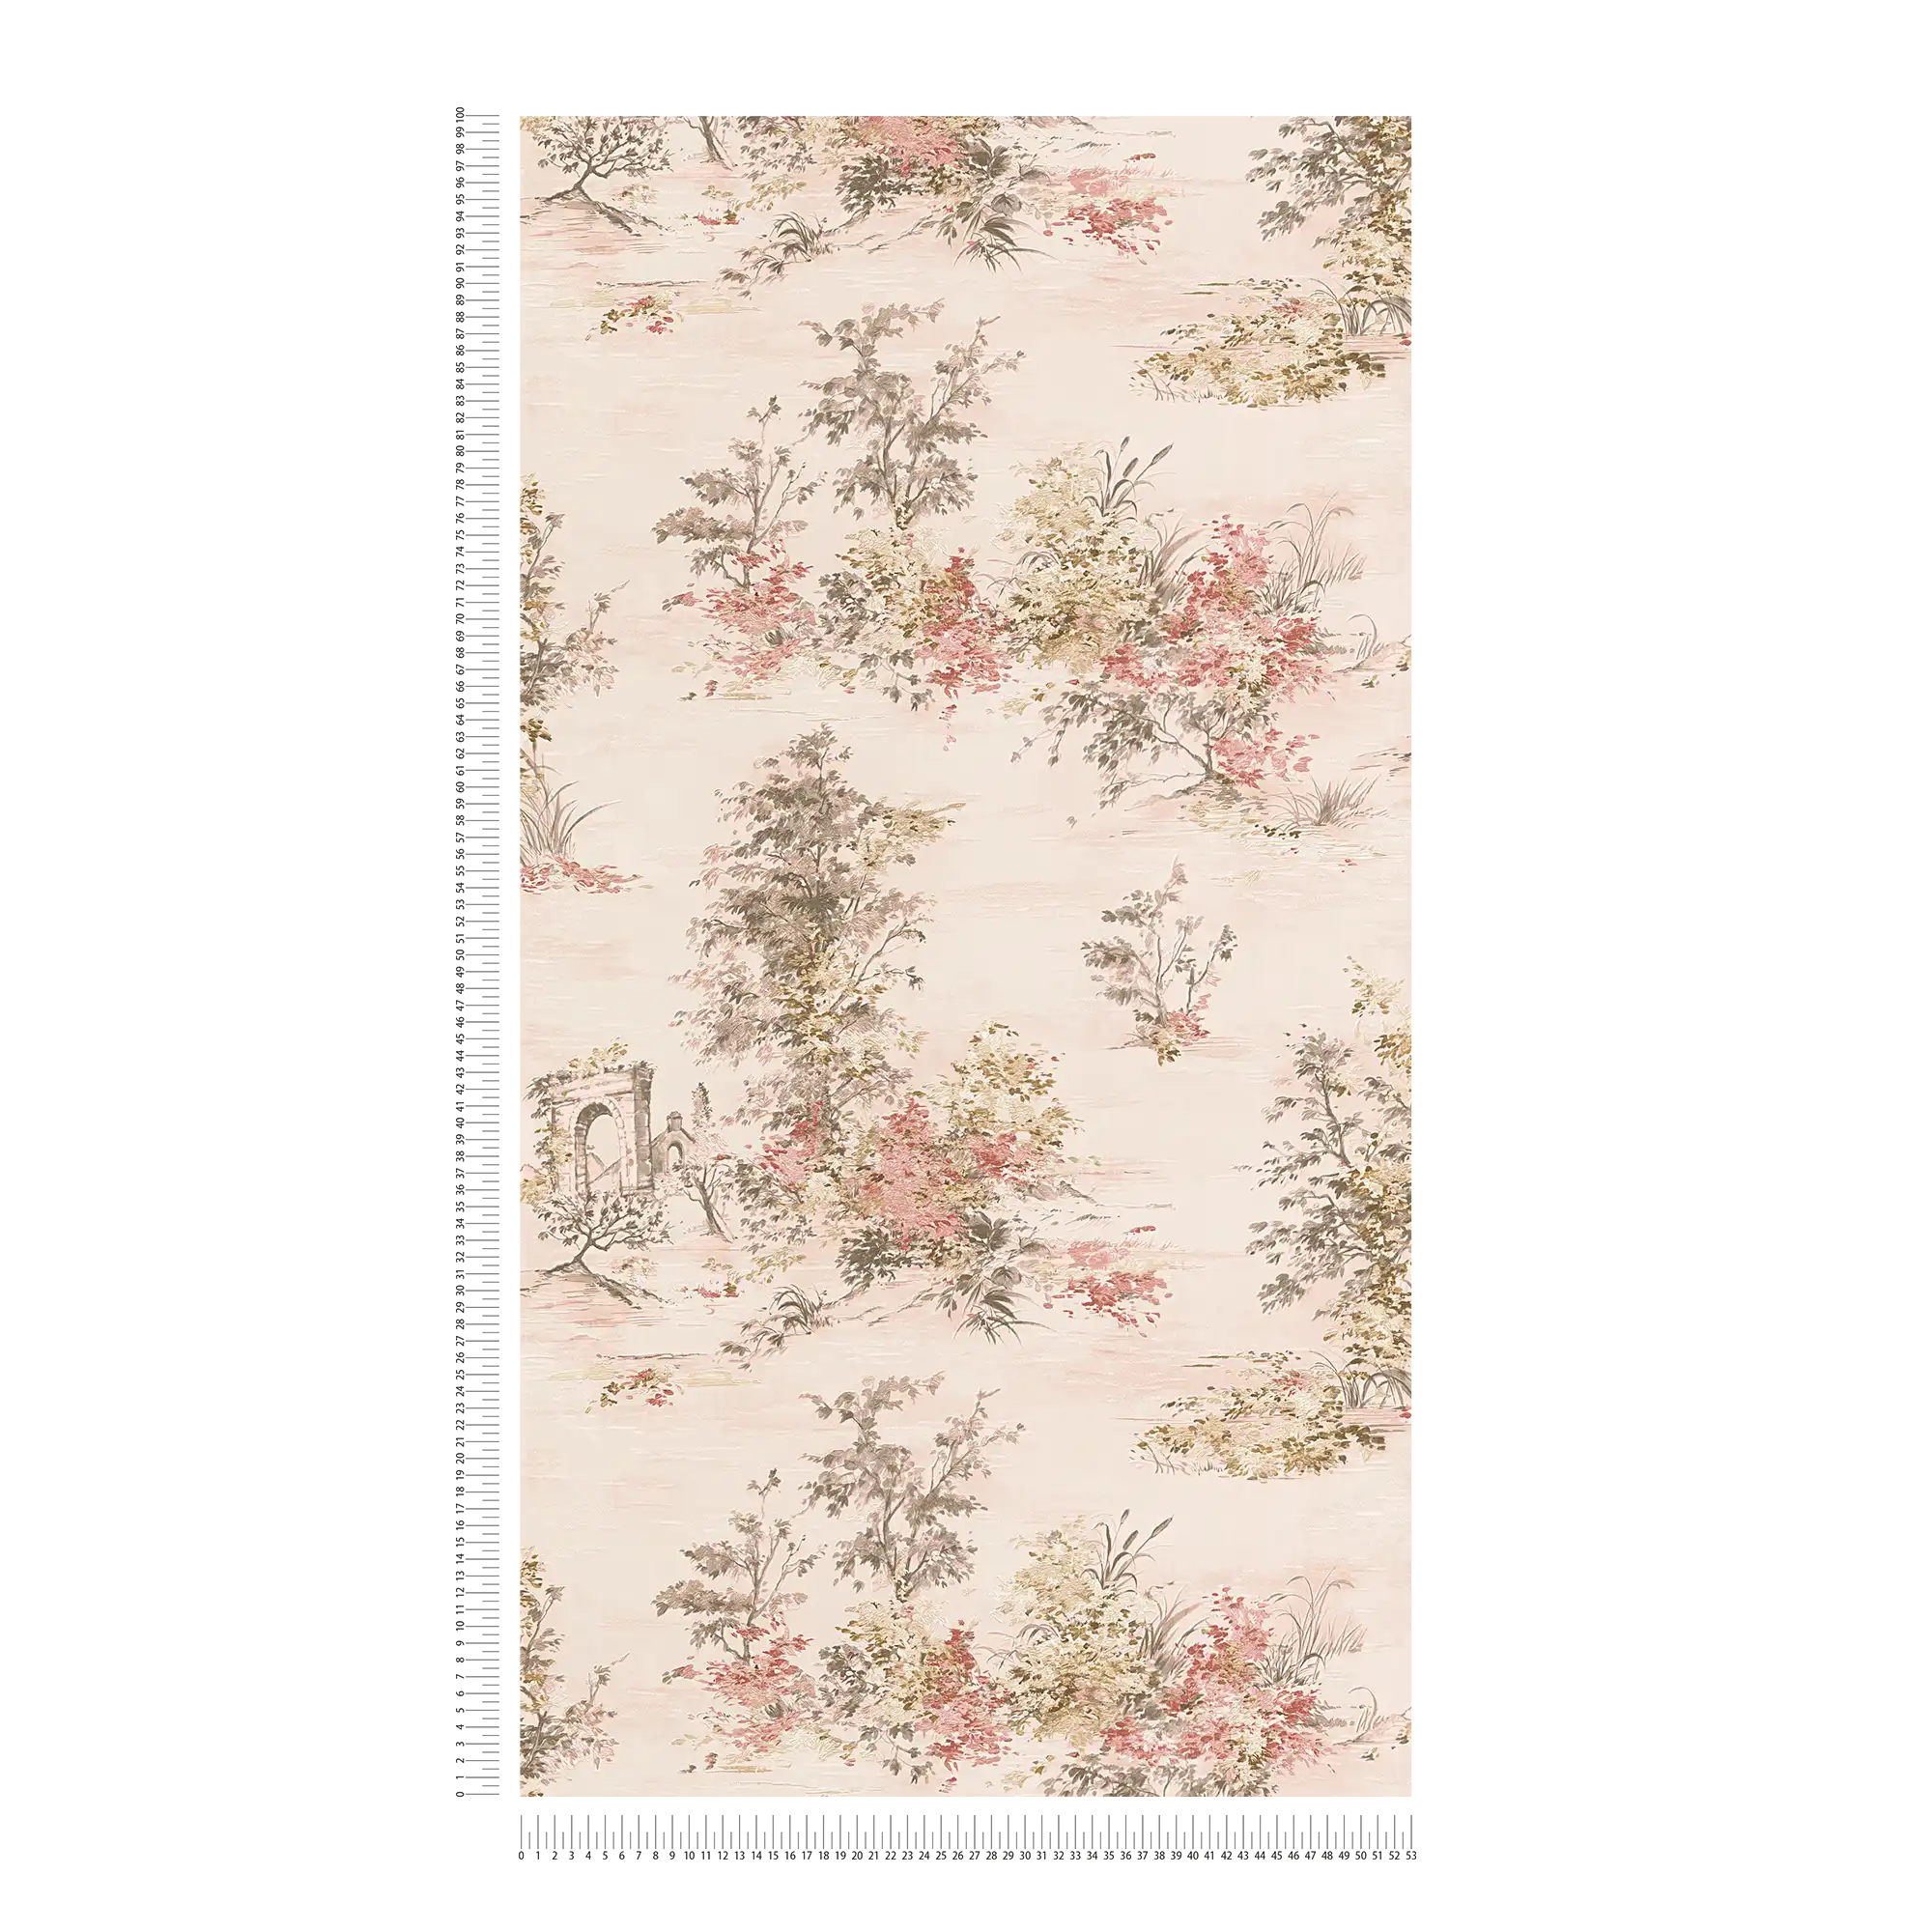             Wallpaper with landscape motif in classic style - red, pink, grey, cream
        